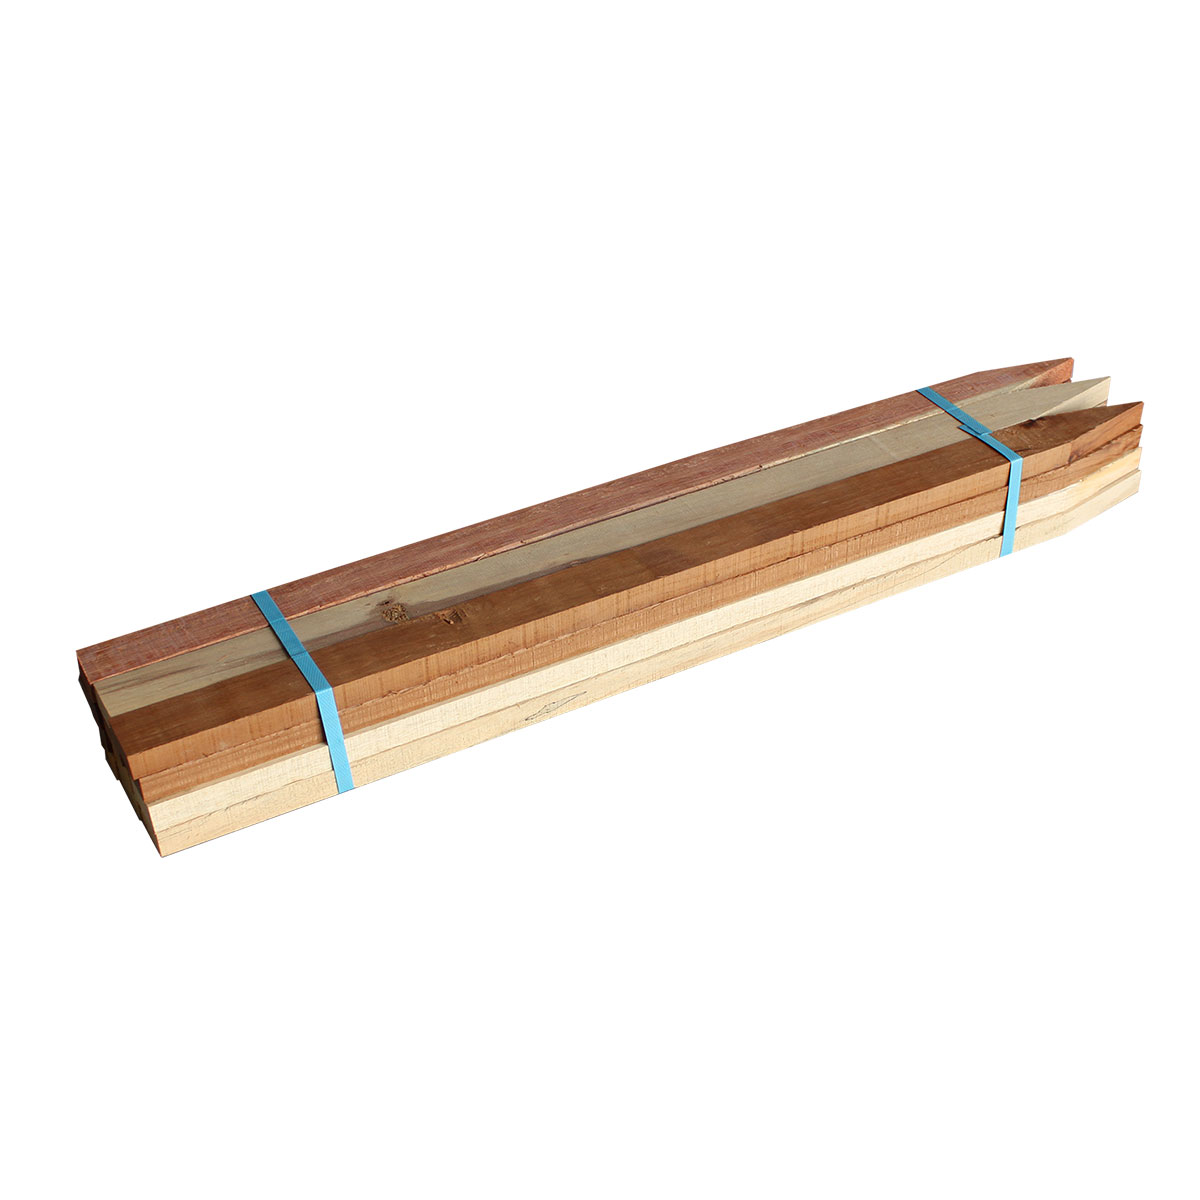 Hardwood Stakes 50 x 25 x 750mm - 12 Pack